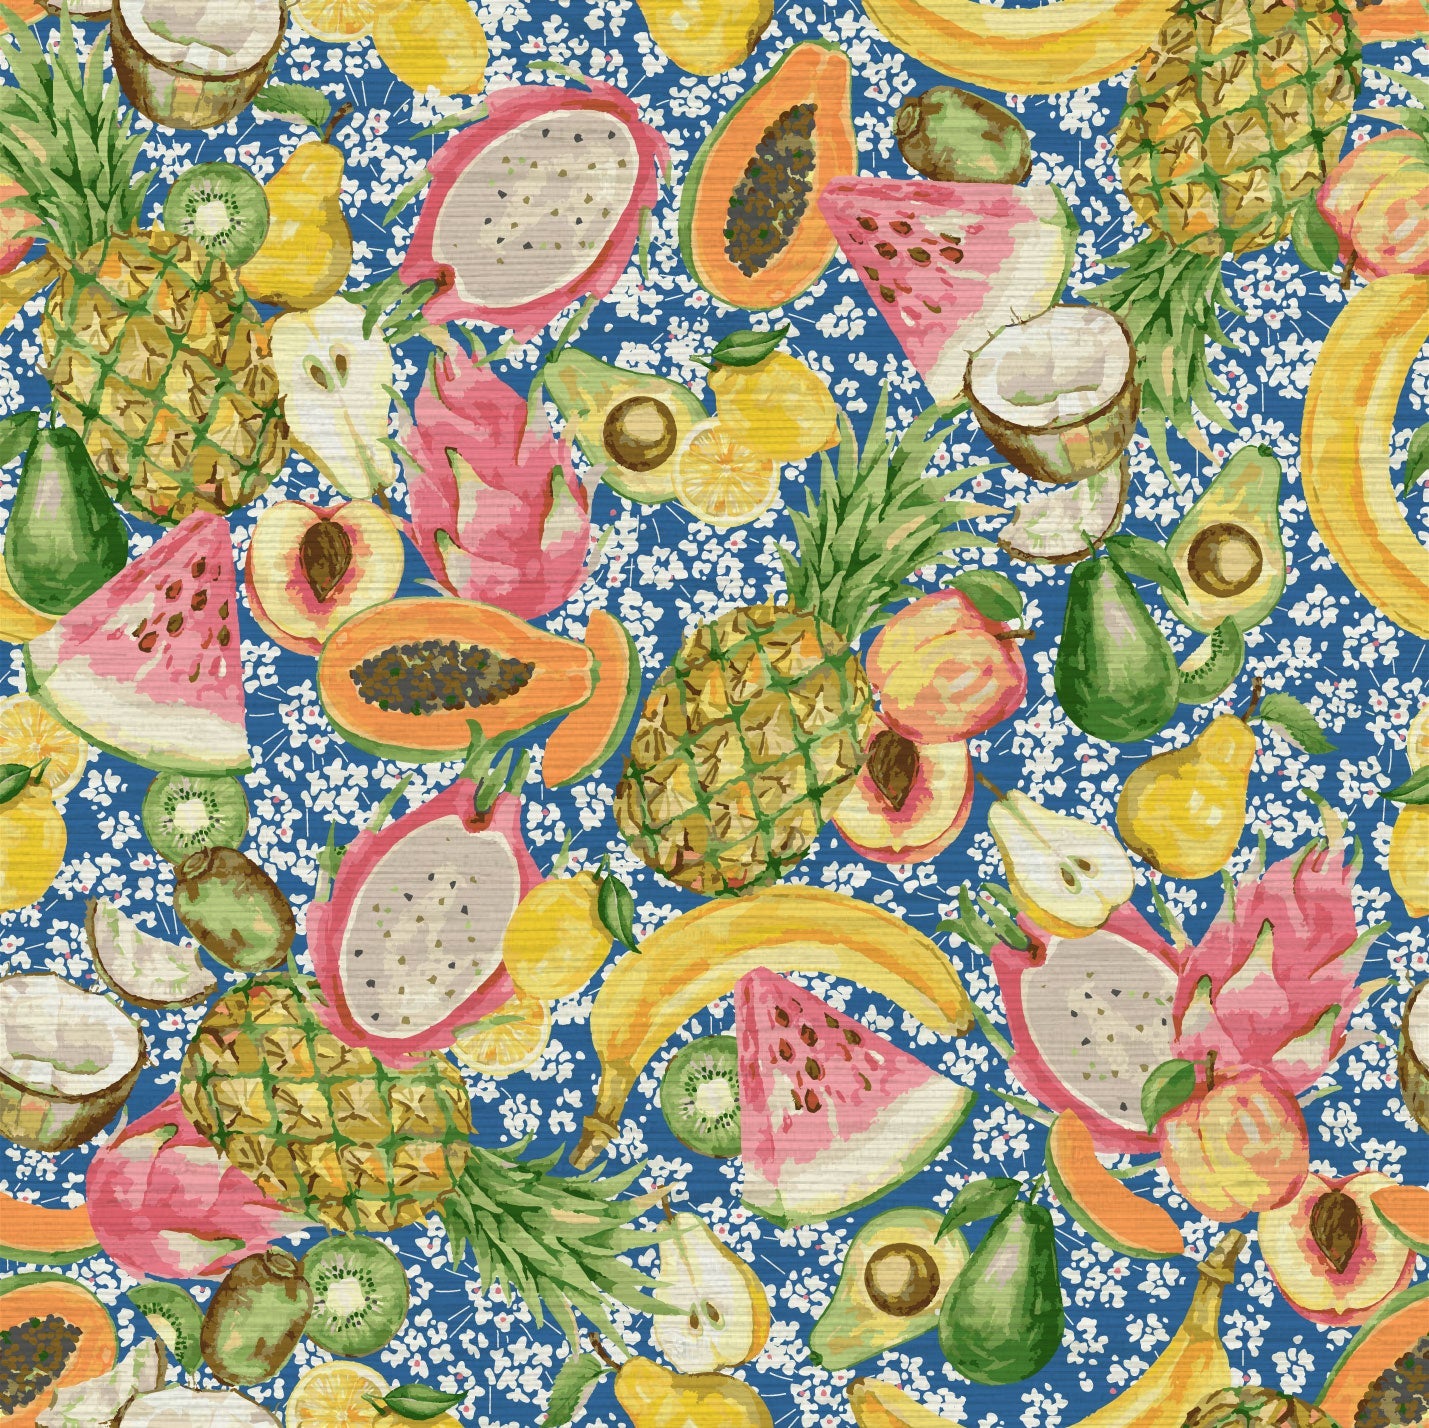 grasscloth wallpaper hand painted with watercolors, blue based print with white ditsy florals with tossed fruit layered on top including: pineapples, limes, bananas, avocados, lemons, pears, peaches, watermelon, coconuts, mangos, bananas and passion fruit